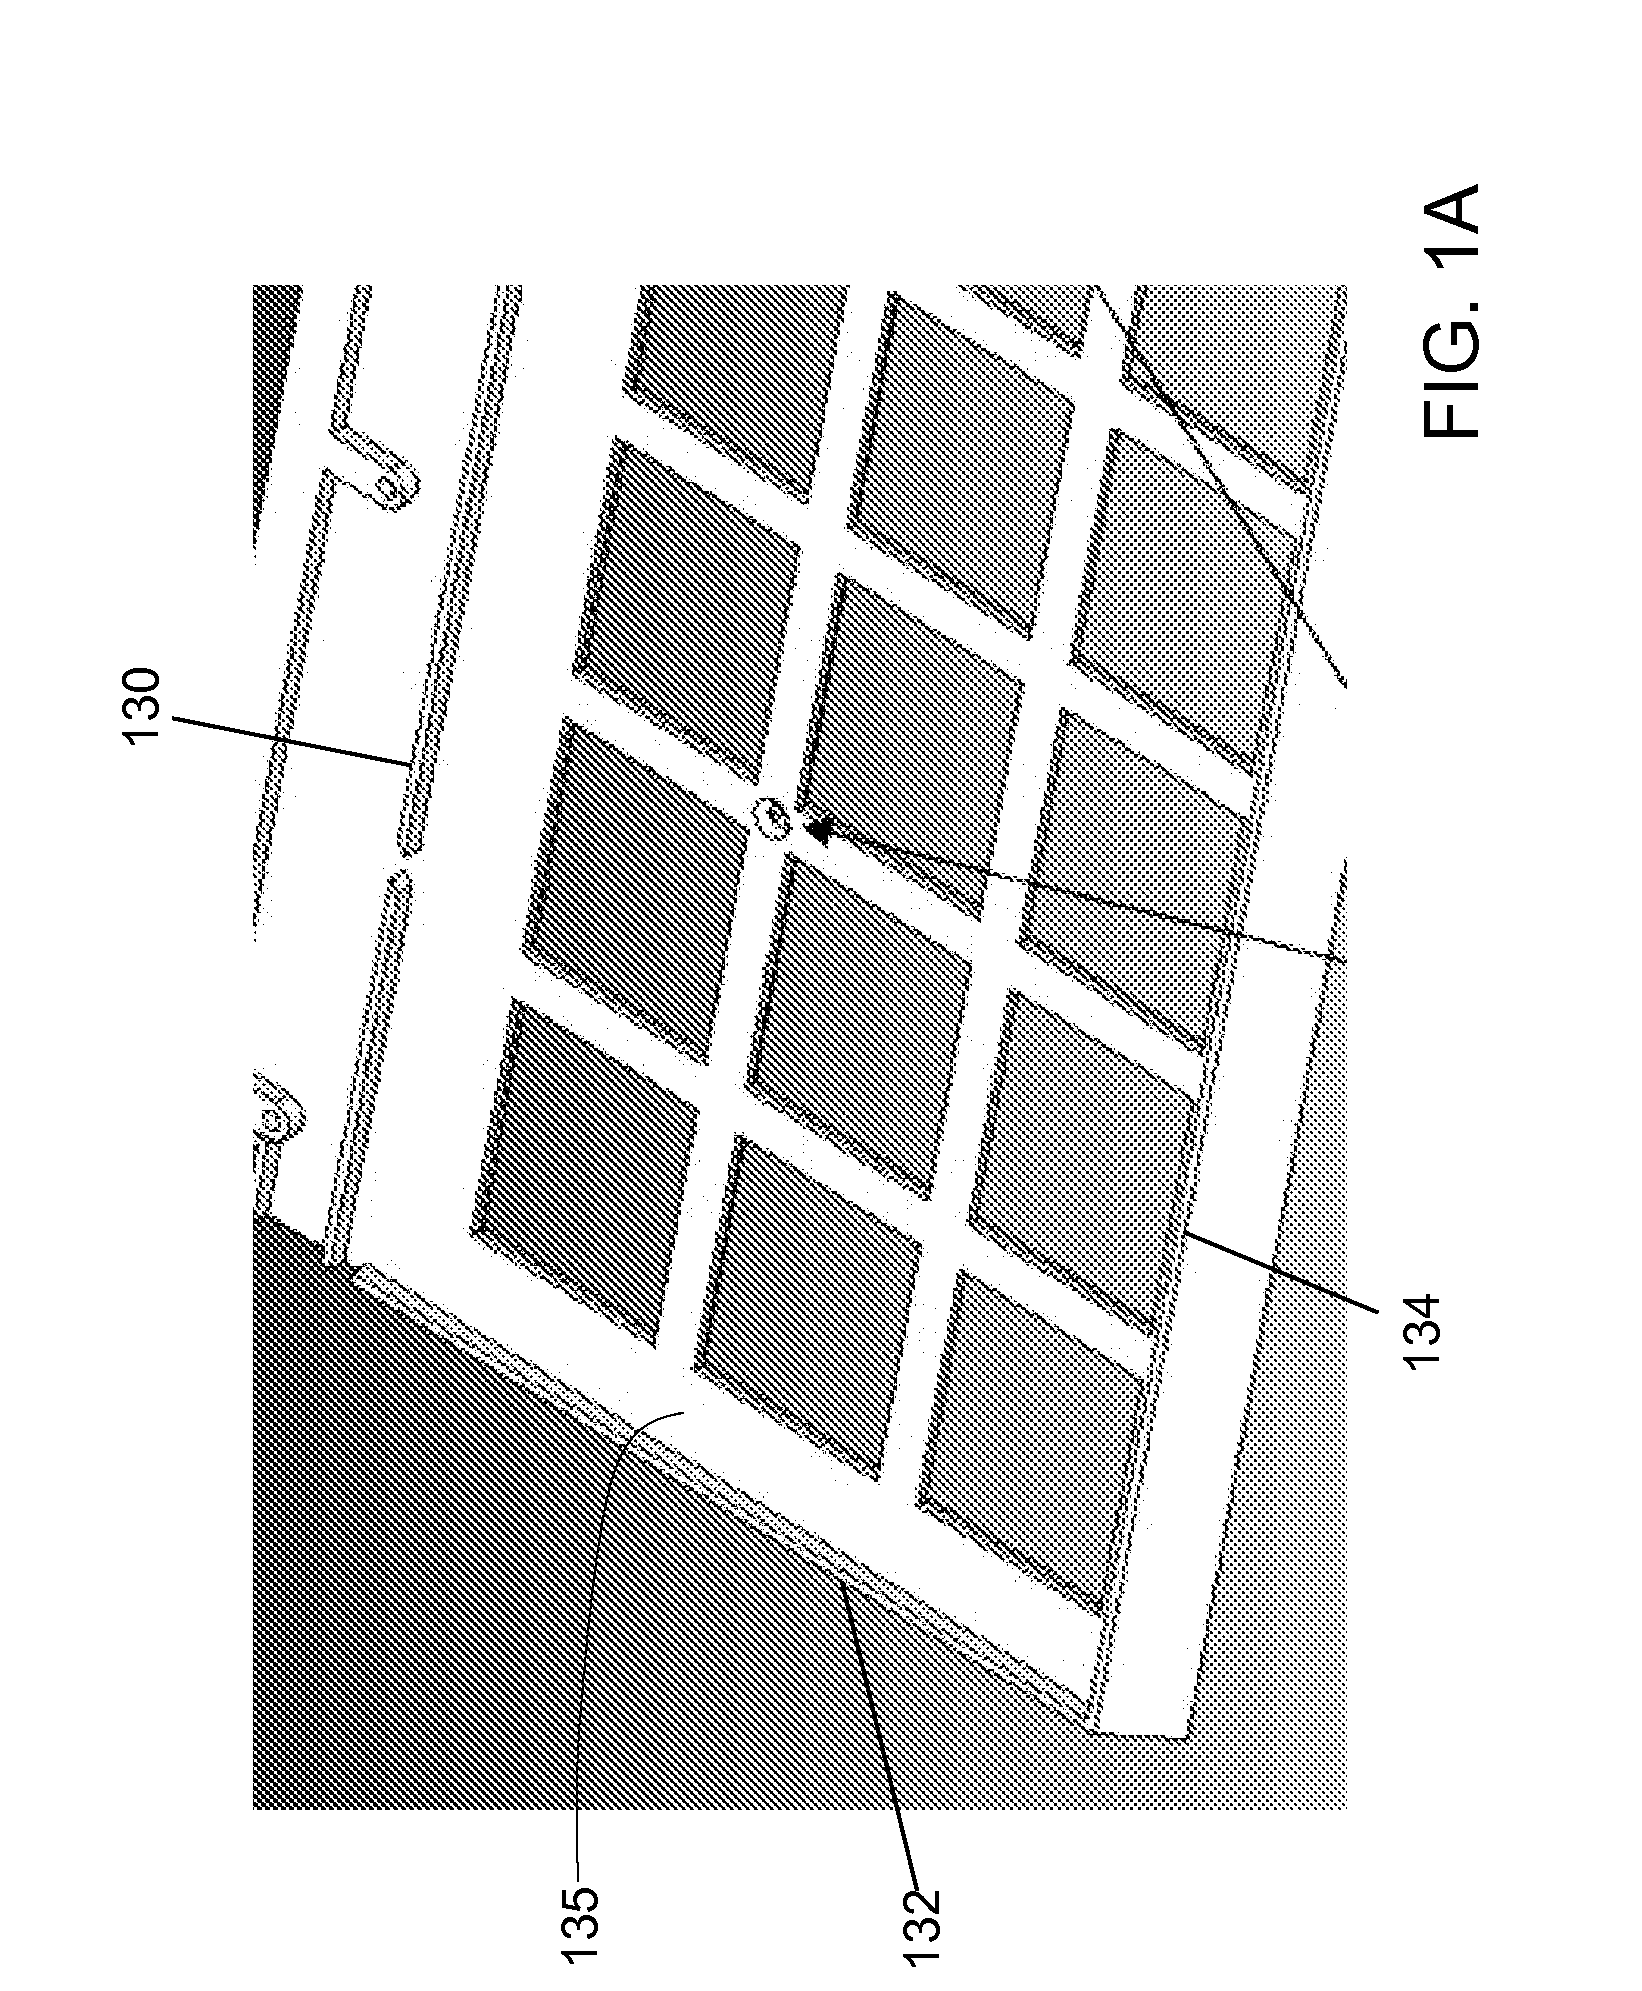 Roofing Product with Integrated Photovoltaic Elements and Flashing System